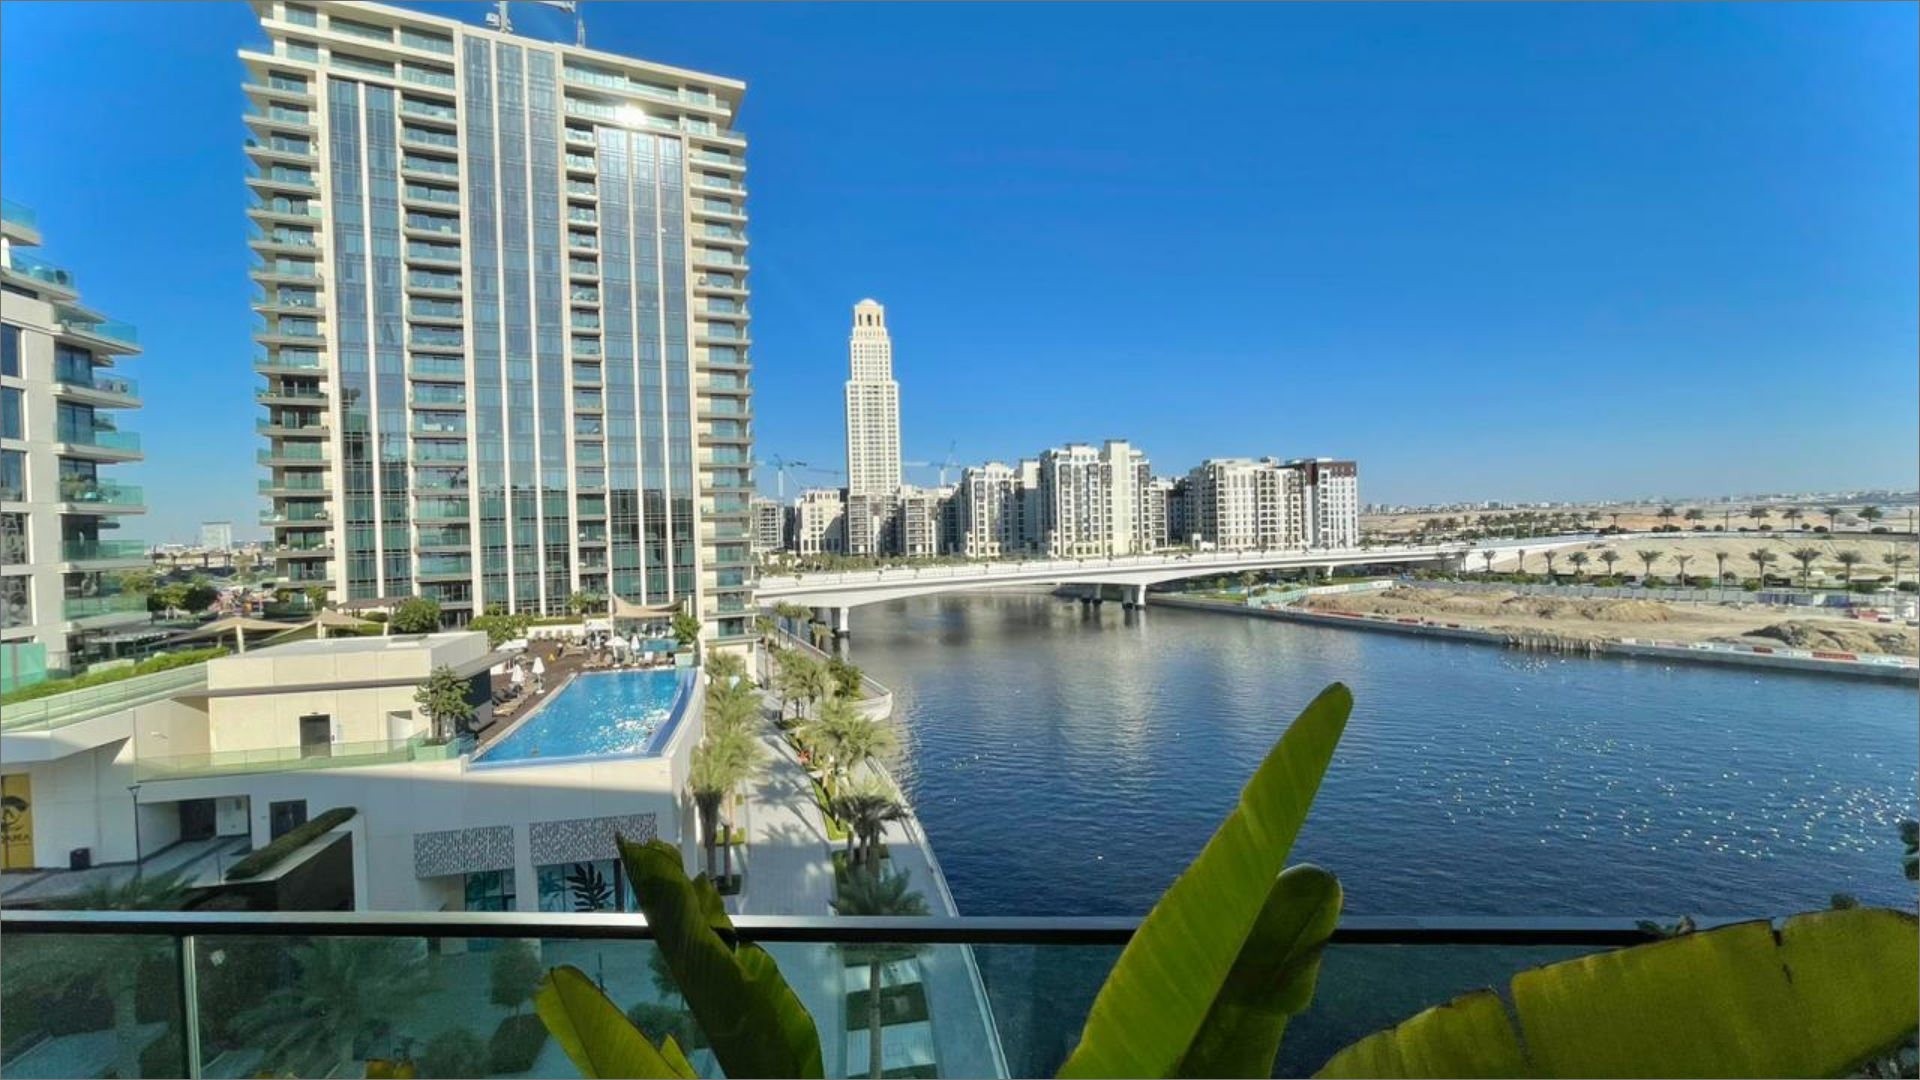 Edge-Realty-2 Bedroom Apartment For Sale In Dubai Creek Harbour